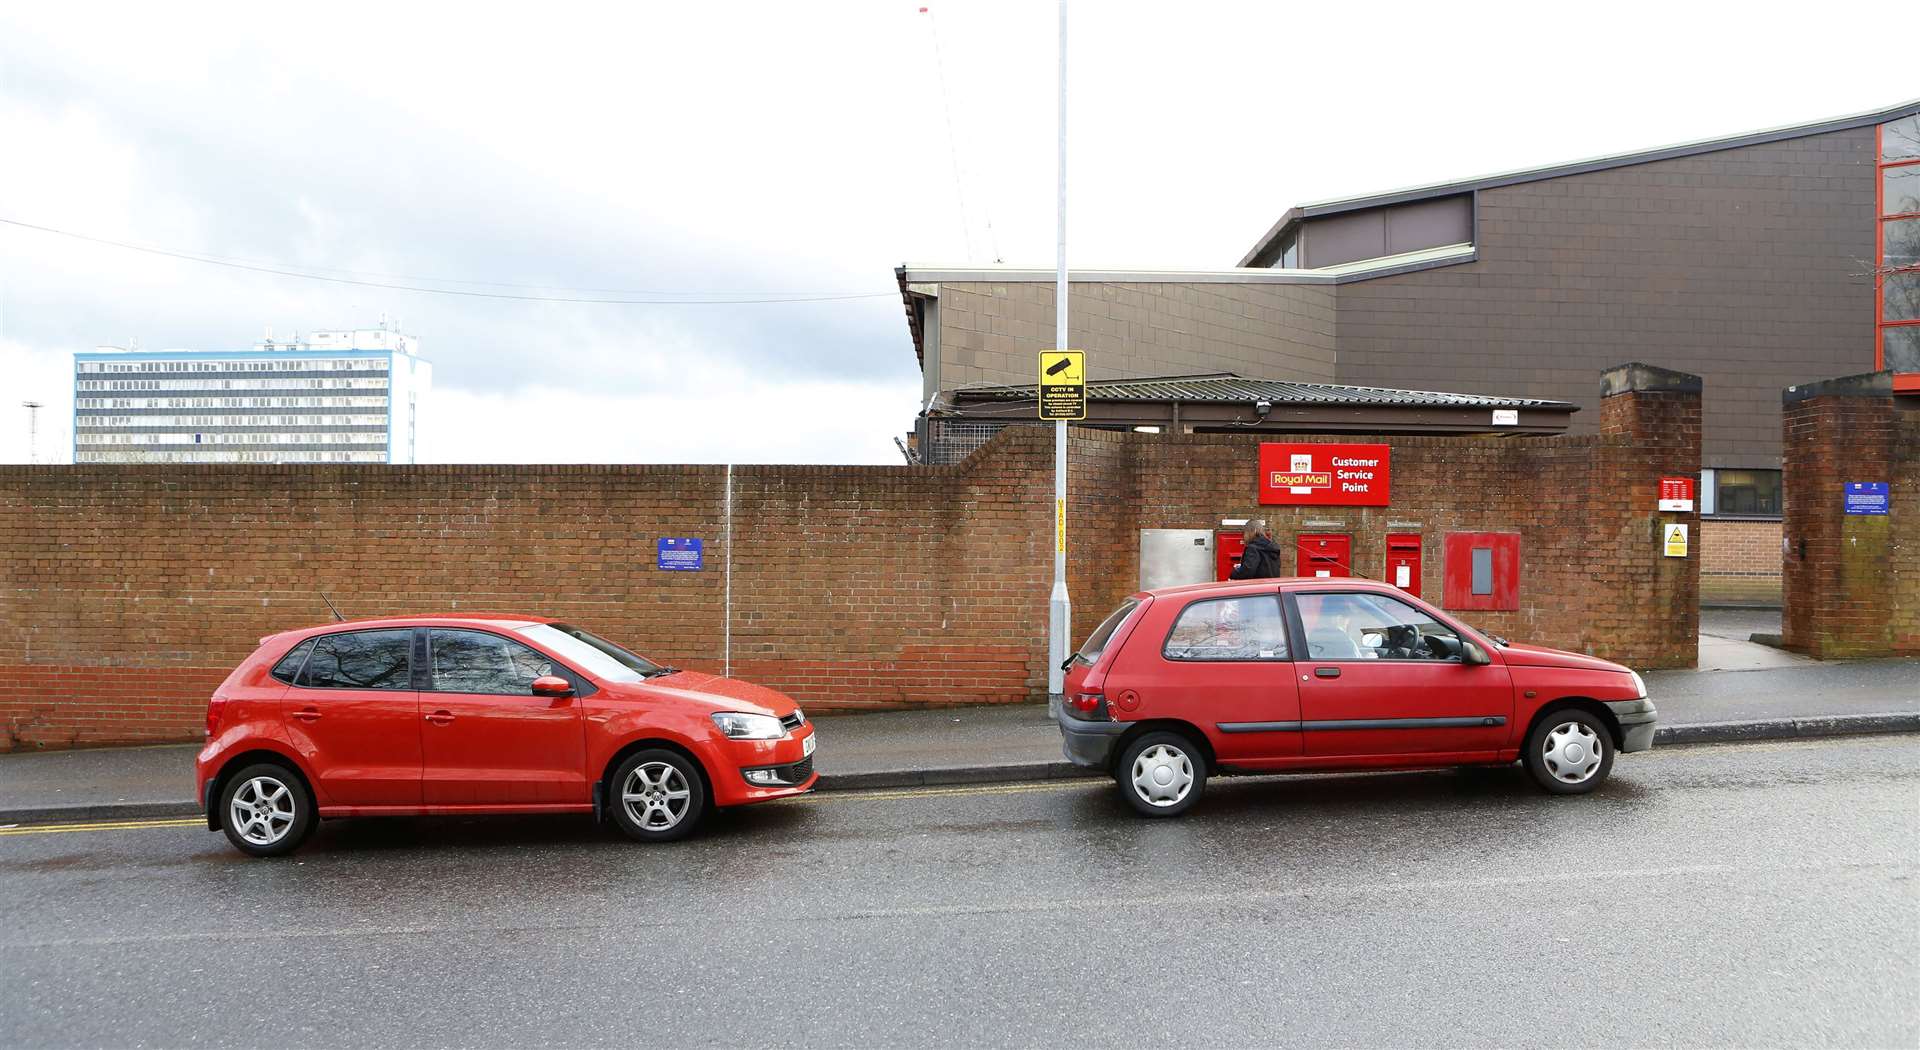 Drivers risk being caught by wardens when parking outside the sorting office. Picture: Andy Jones